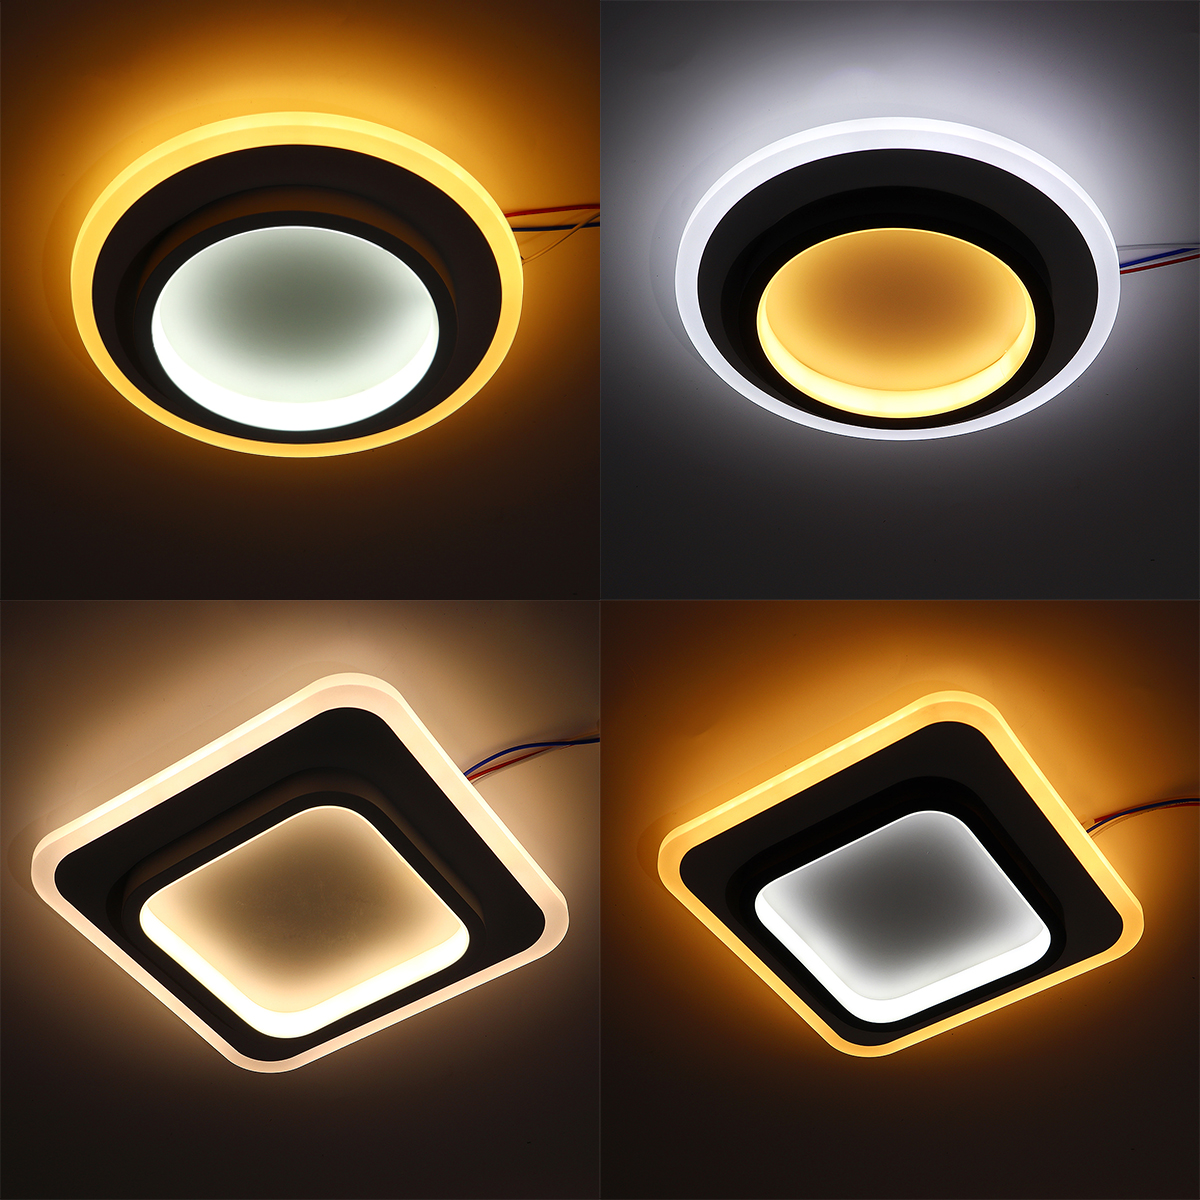 LED-Dimmable-Ceiling-Light-SquareRound-Lamp-Fixtures-Bedroom-Cloakroom-85-265V-1854137-9